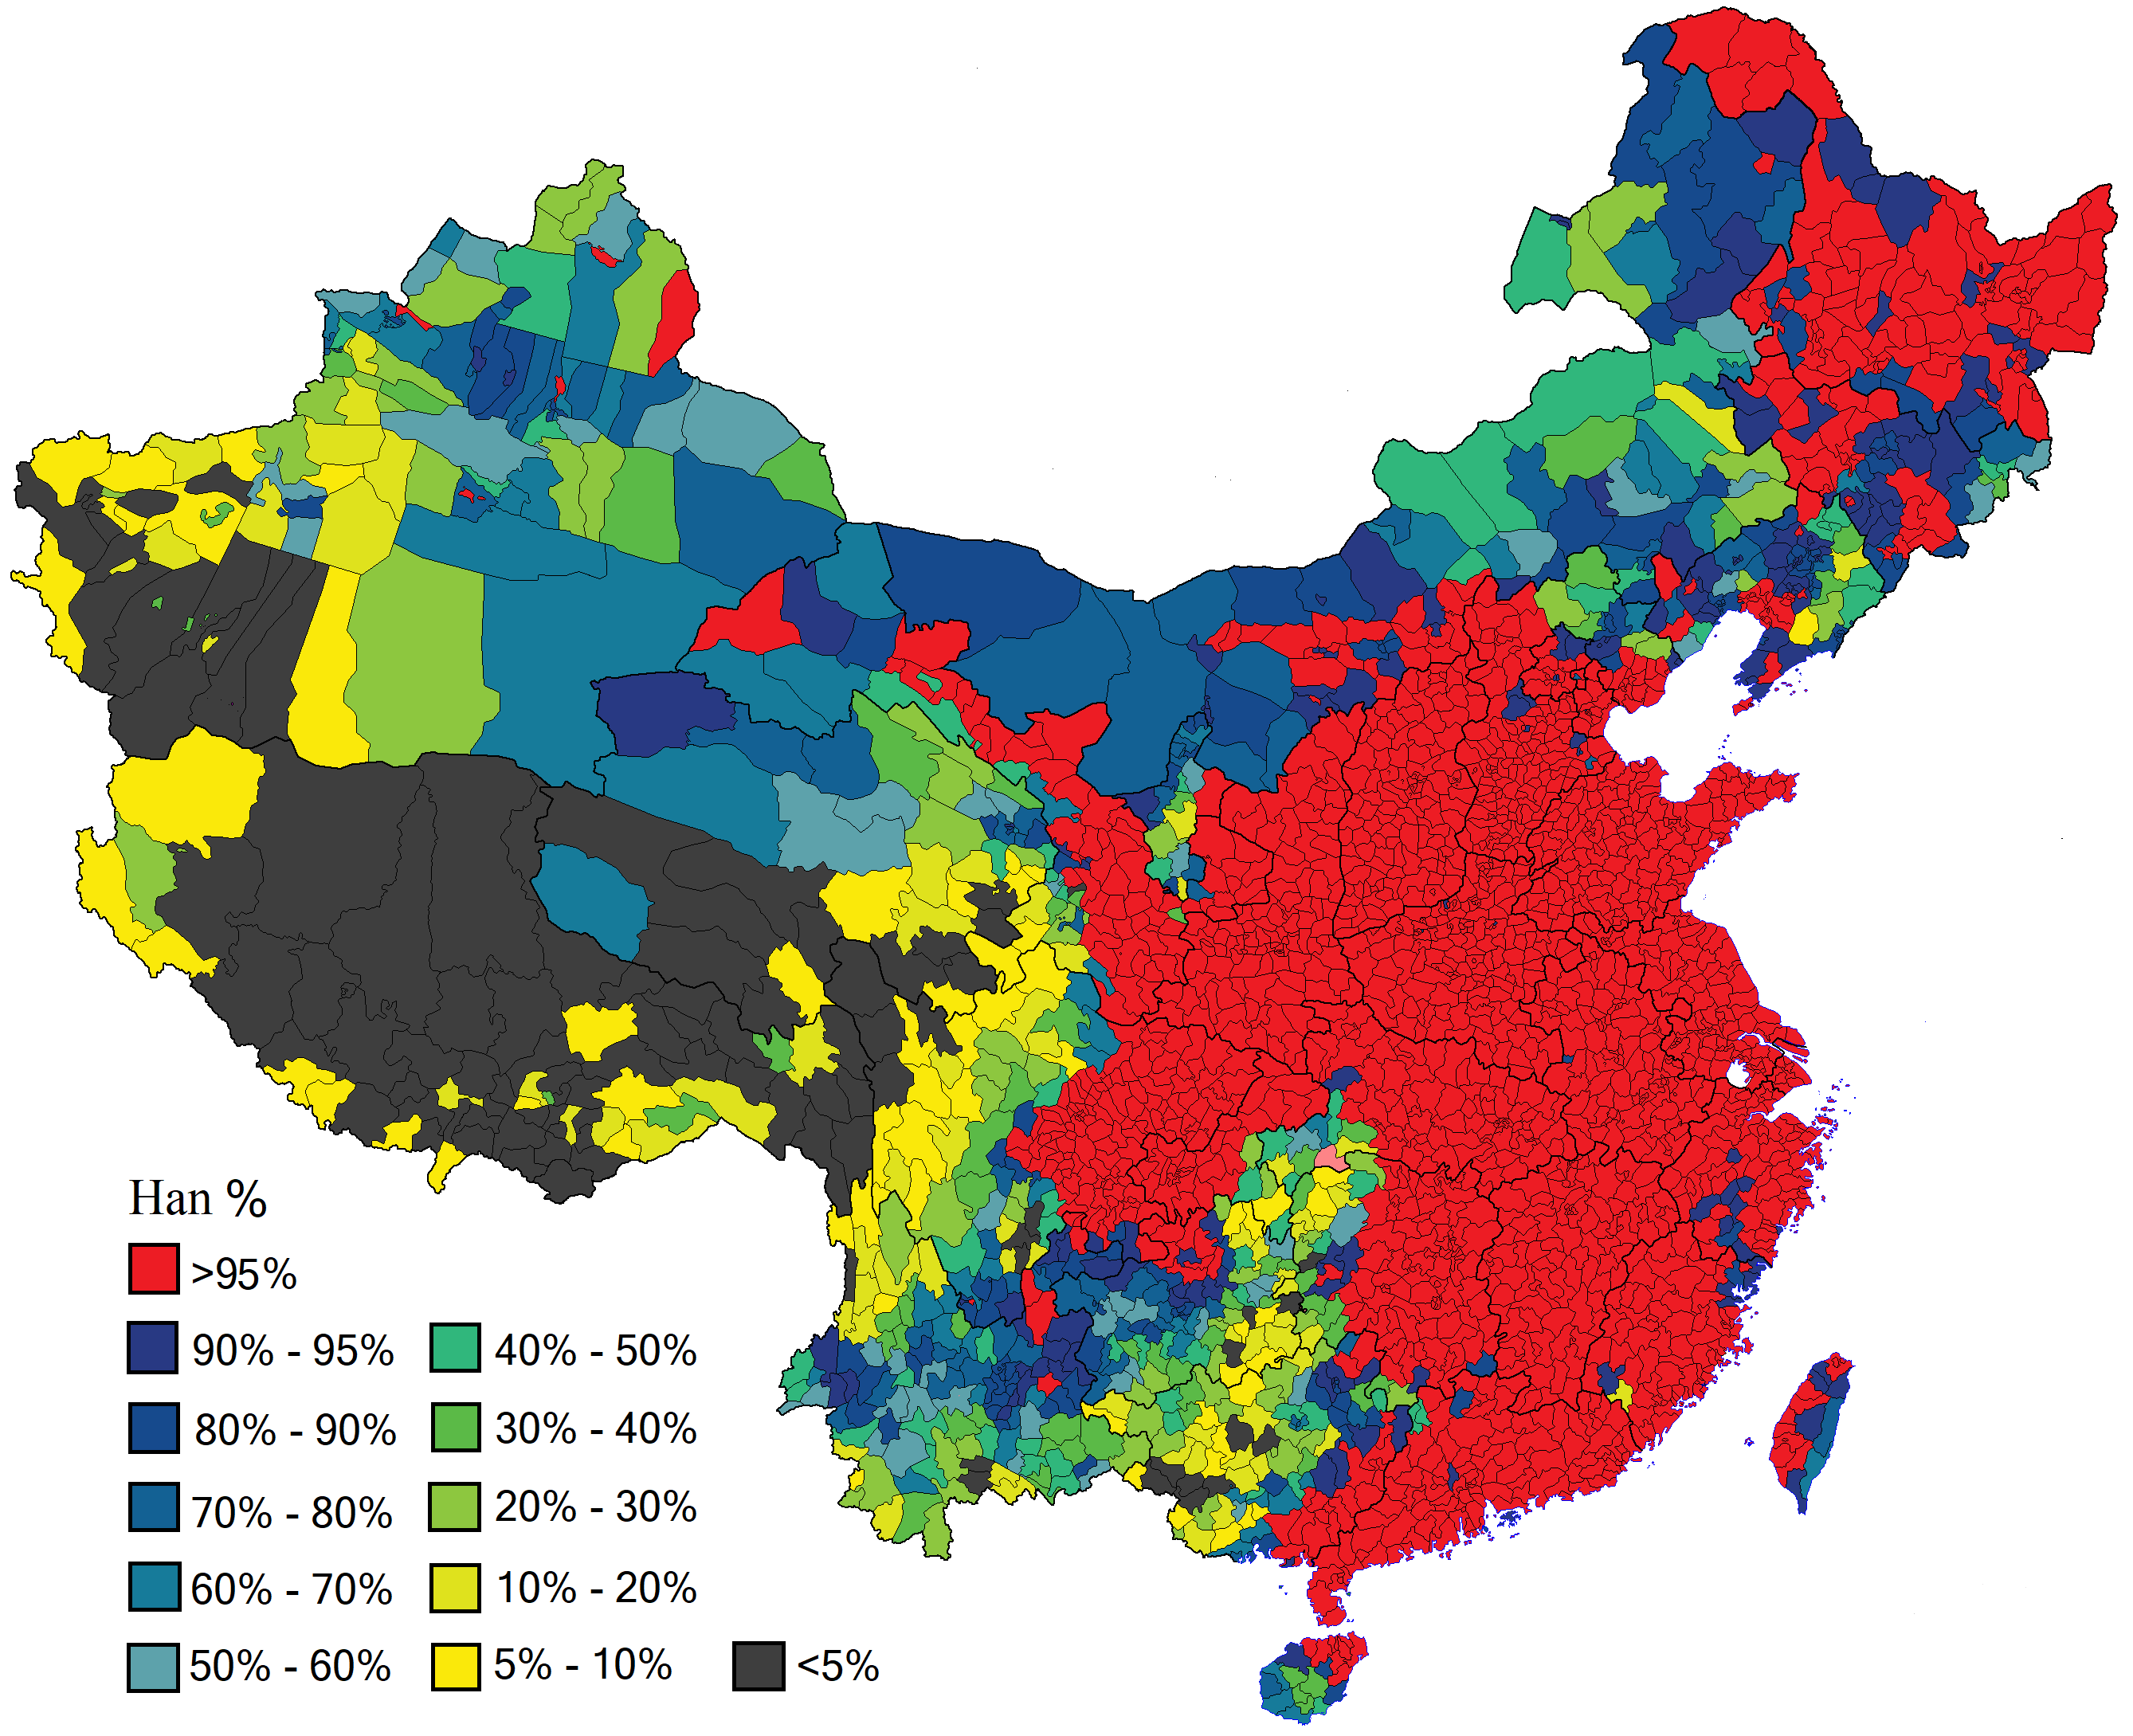 Map: Han Population in China - The Sounding Line